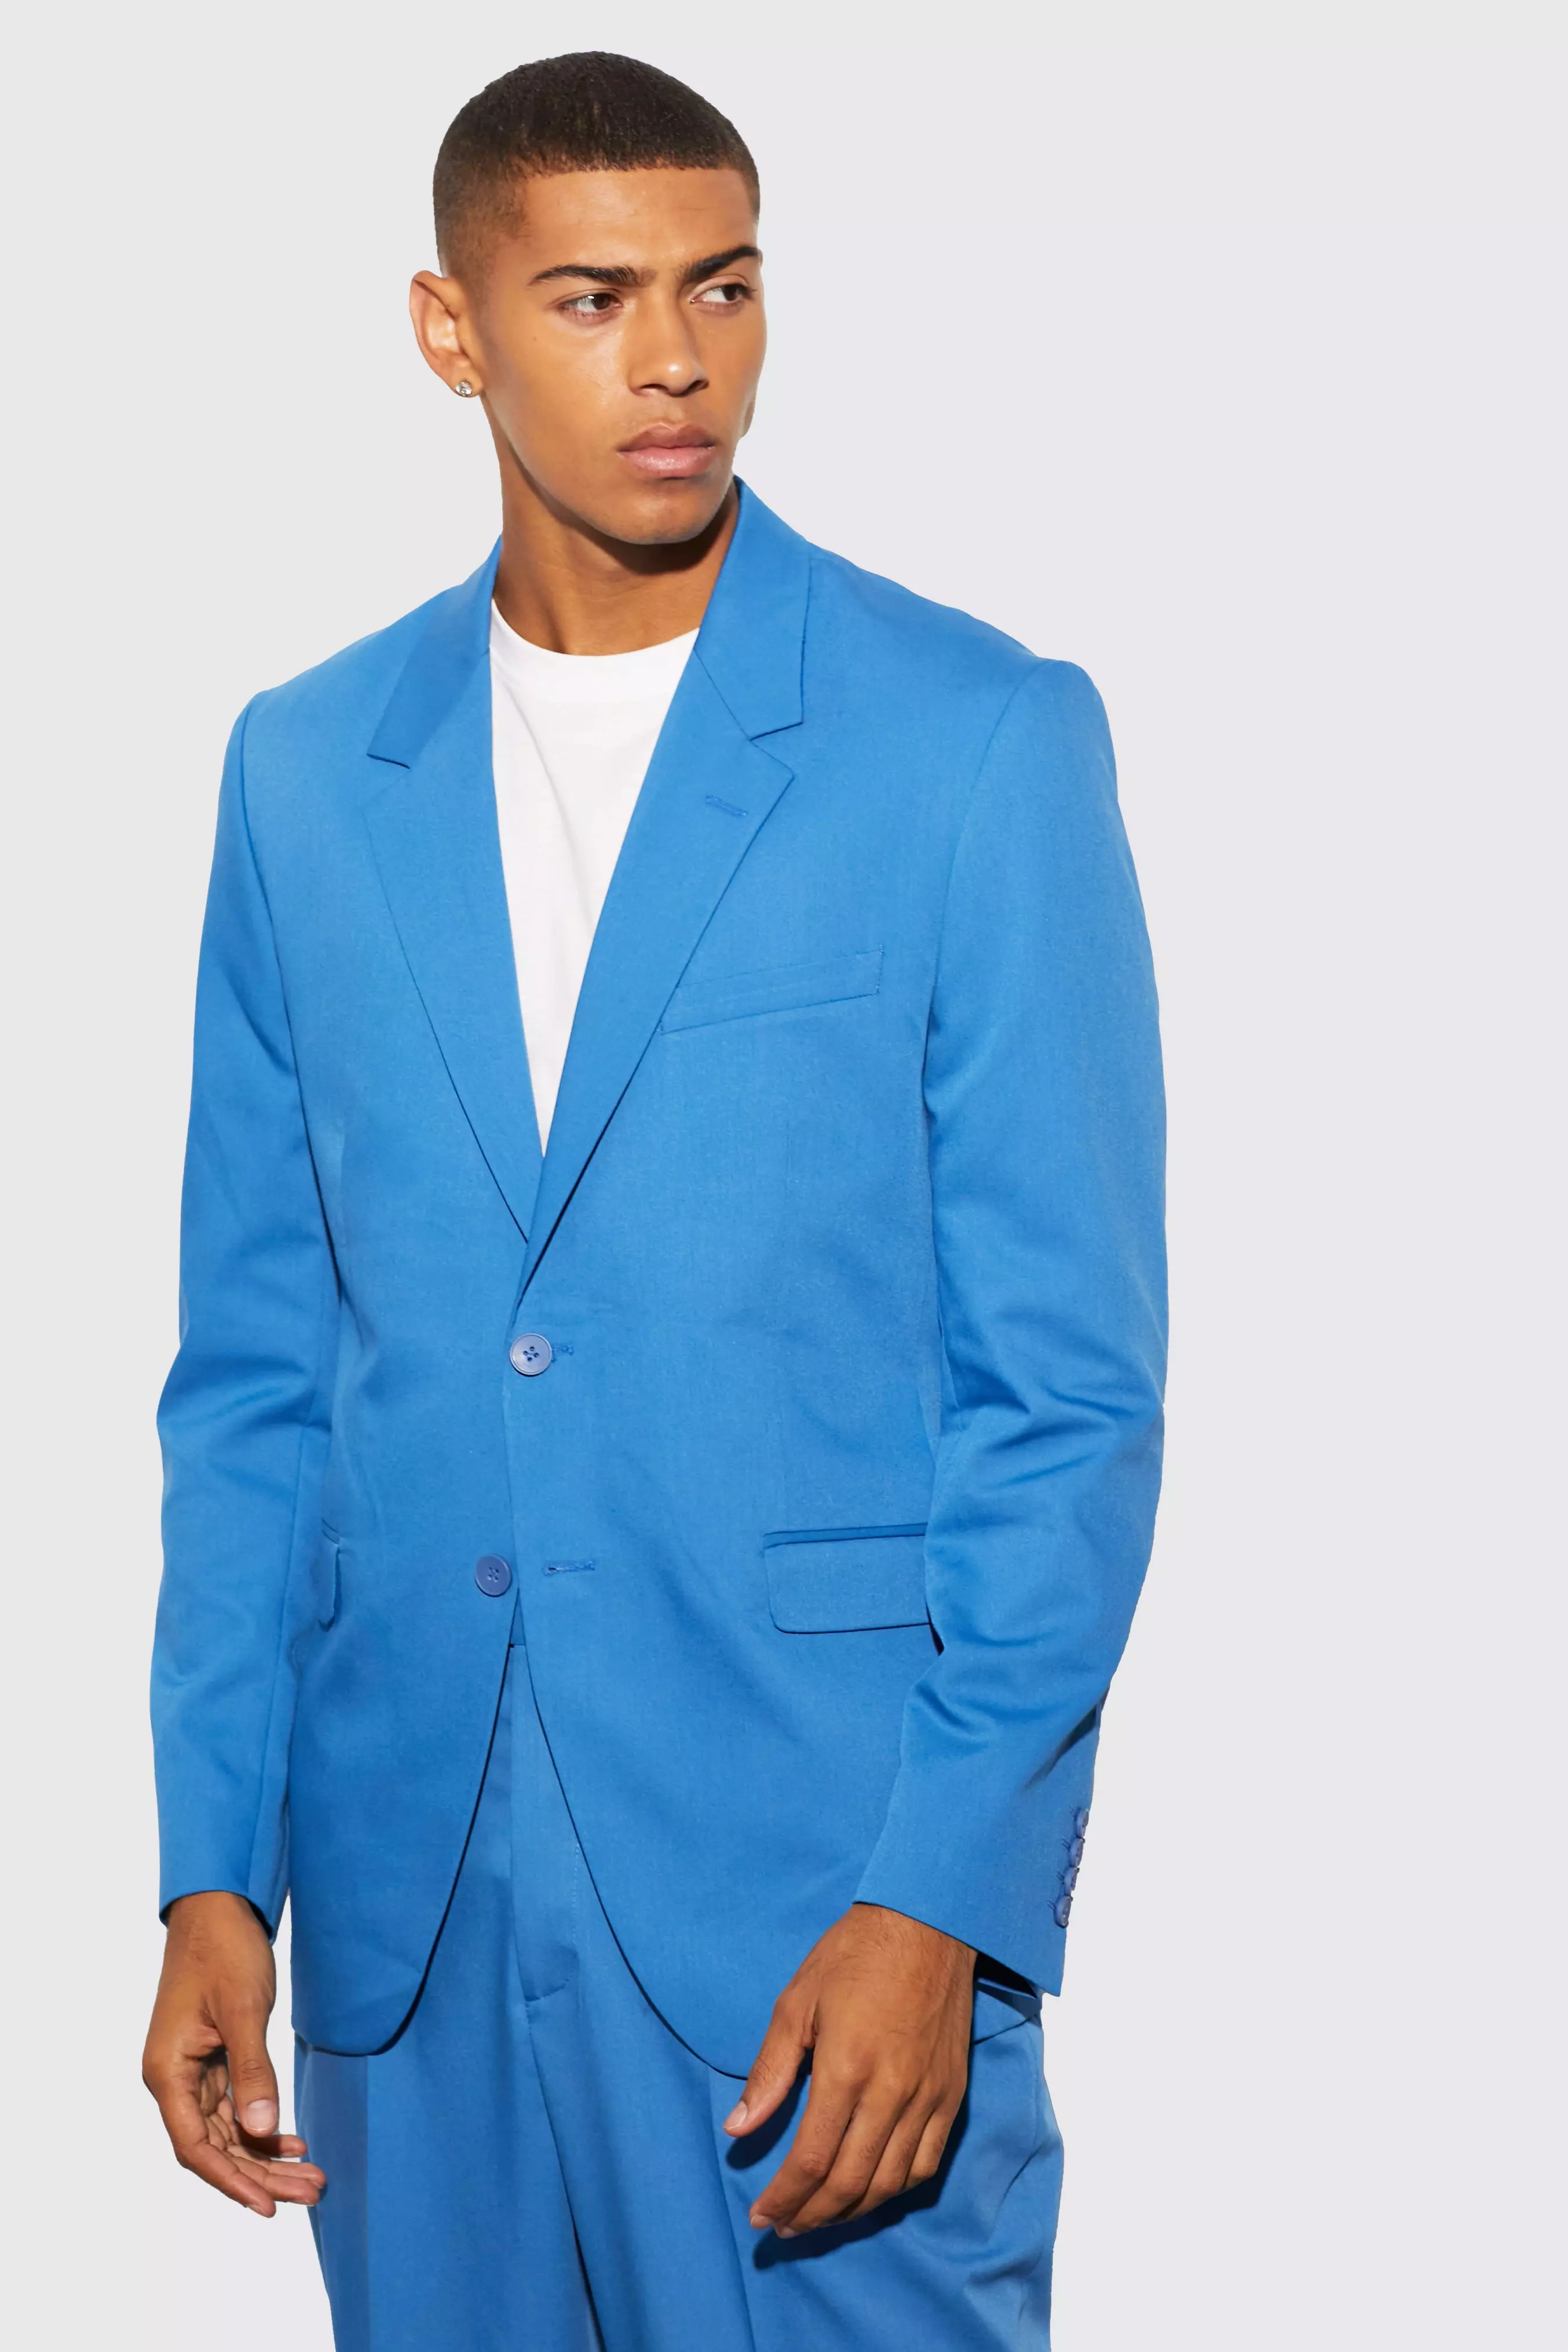 Relaxed Fit Single Breasted Suit Jacket marine blue